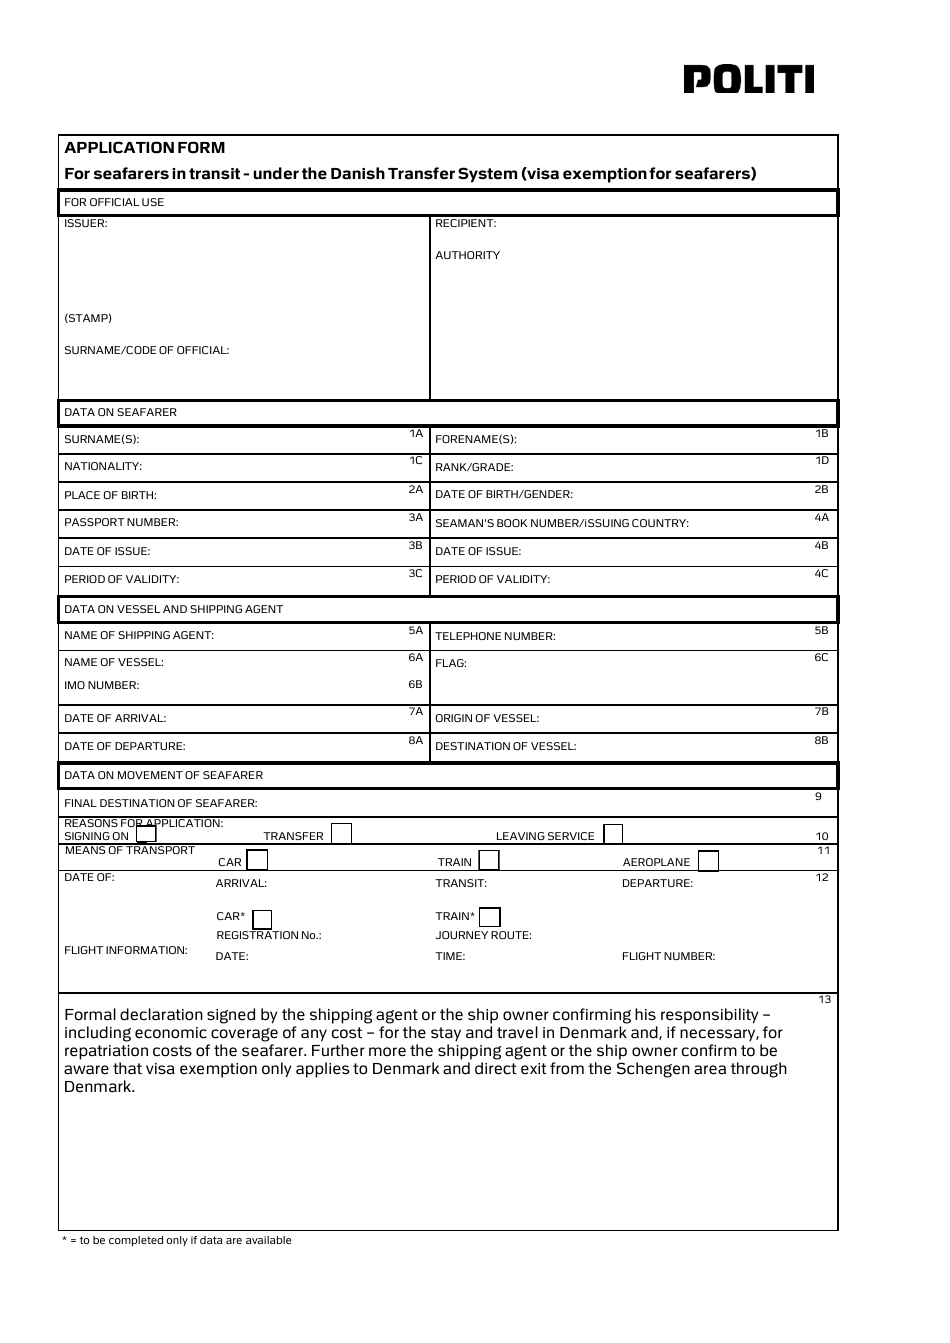 Application Form - for Seafarers in Transit - Under the Danish Transfer System (Visa Exemption for Seafarers) - Denmark, Page 1